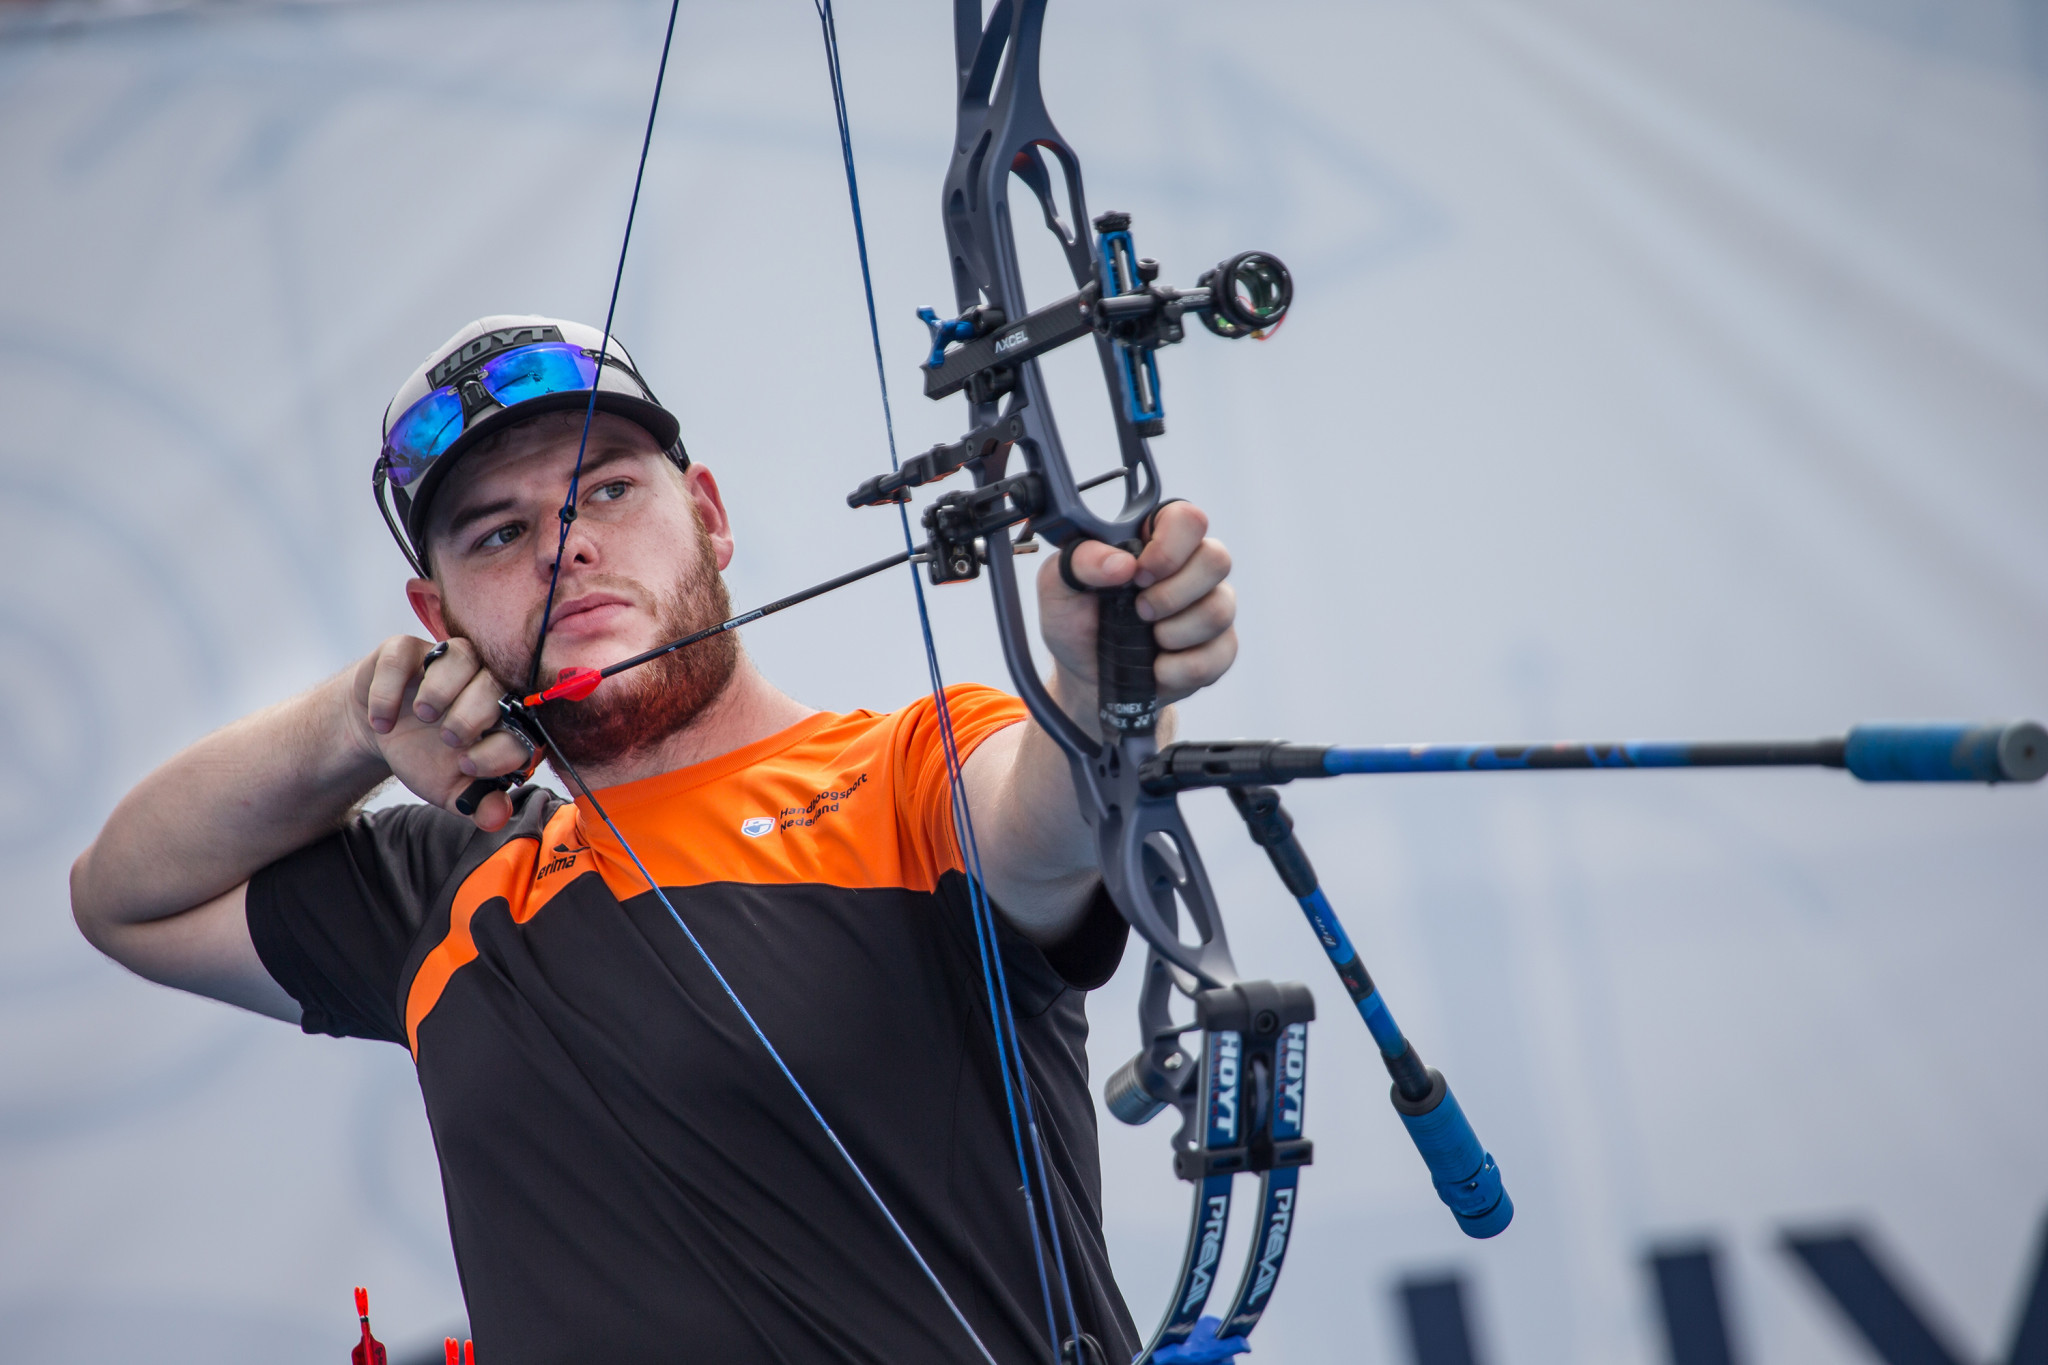 Schloesser impresses on second day at World Archery Indoor Series in Luxembourg